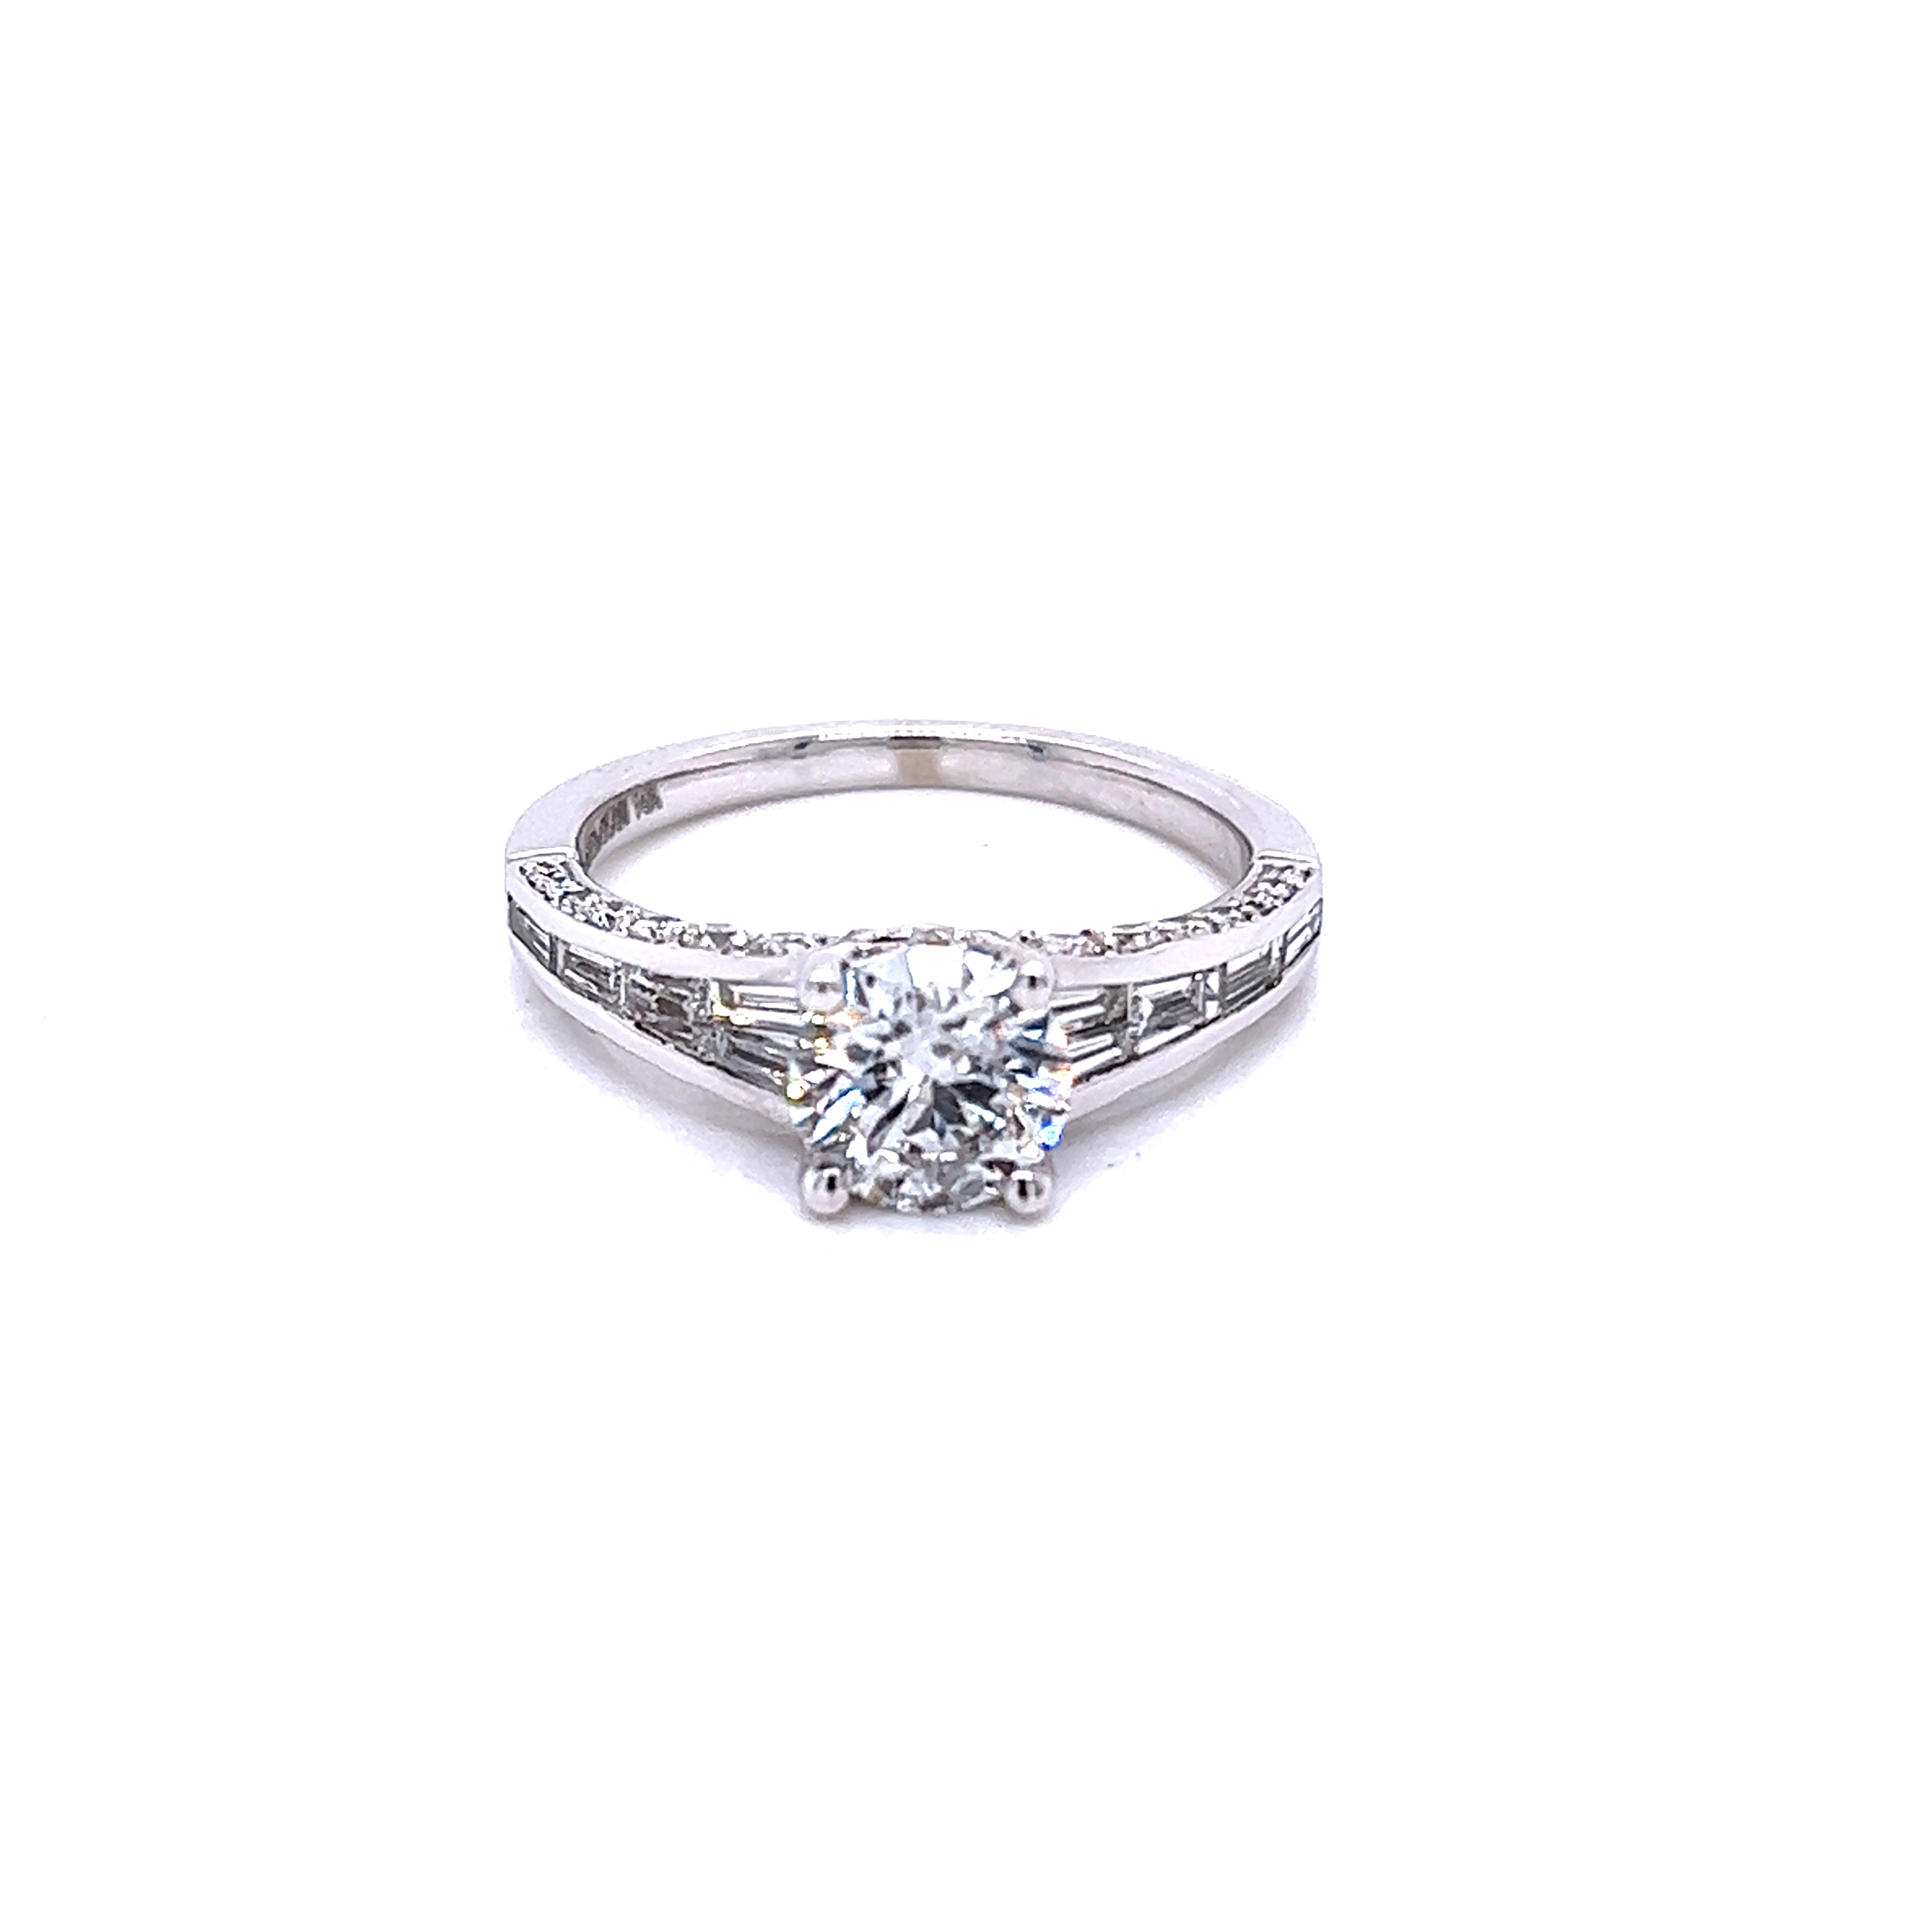 14 Karat white gold engagement ring Size 6.5 With One 1.06Ct Round Brilliant D I1 Diamond And 50=1.05Tw Various Shapes G I Diamonds